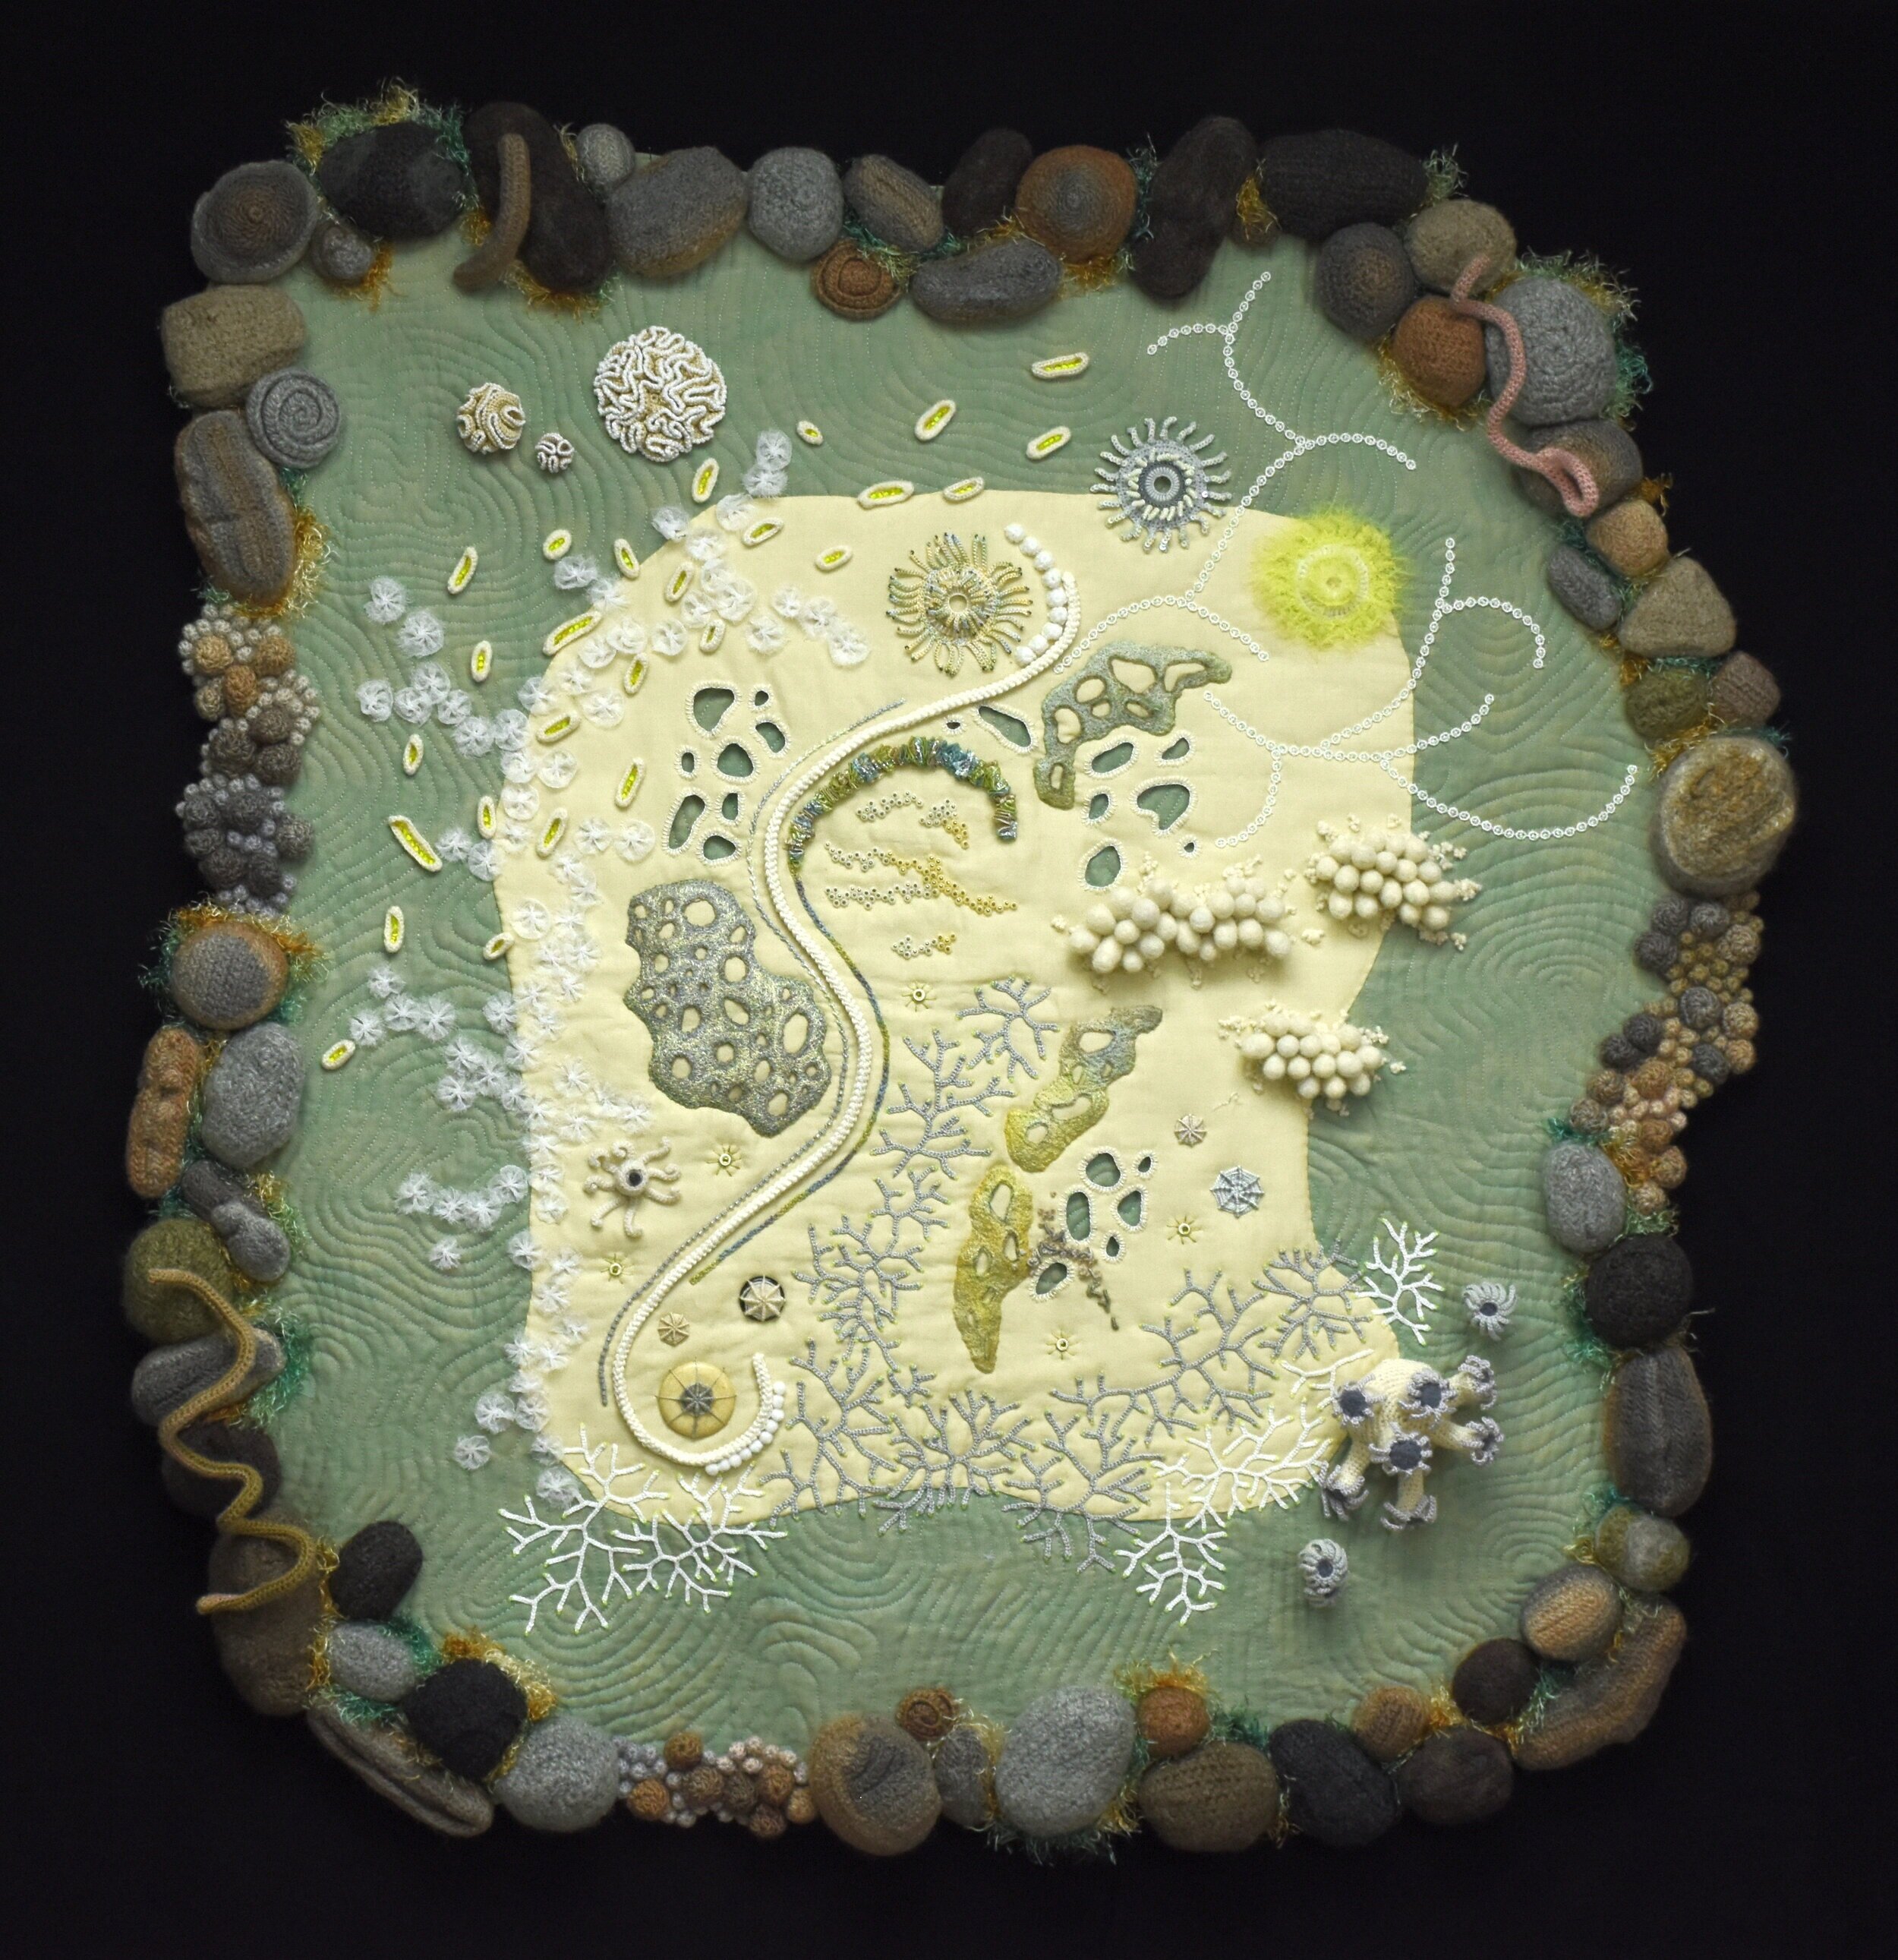  2019 Bleached Tidal Pool  Machine and Hand quilting, crochet, needle felting, beading, embroidery   